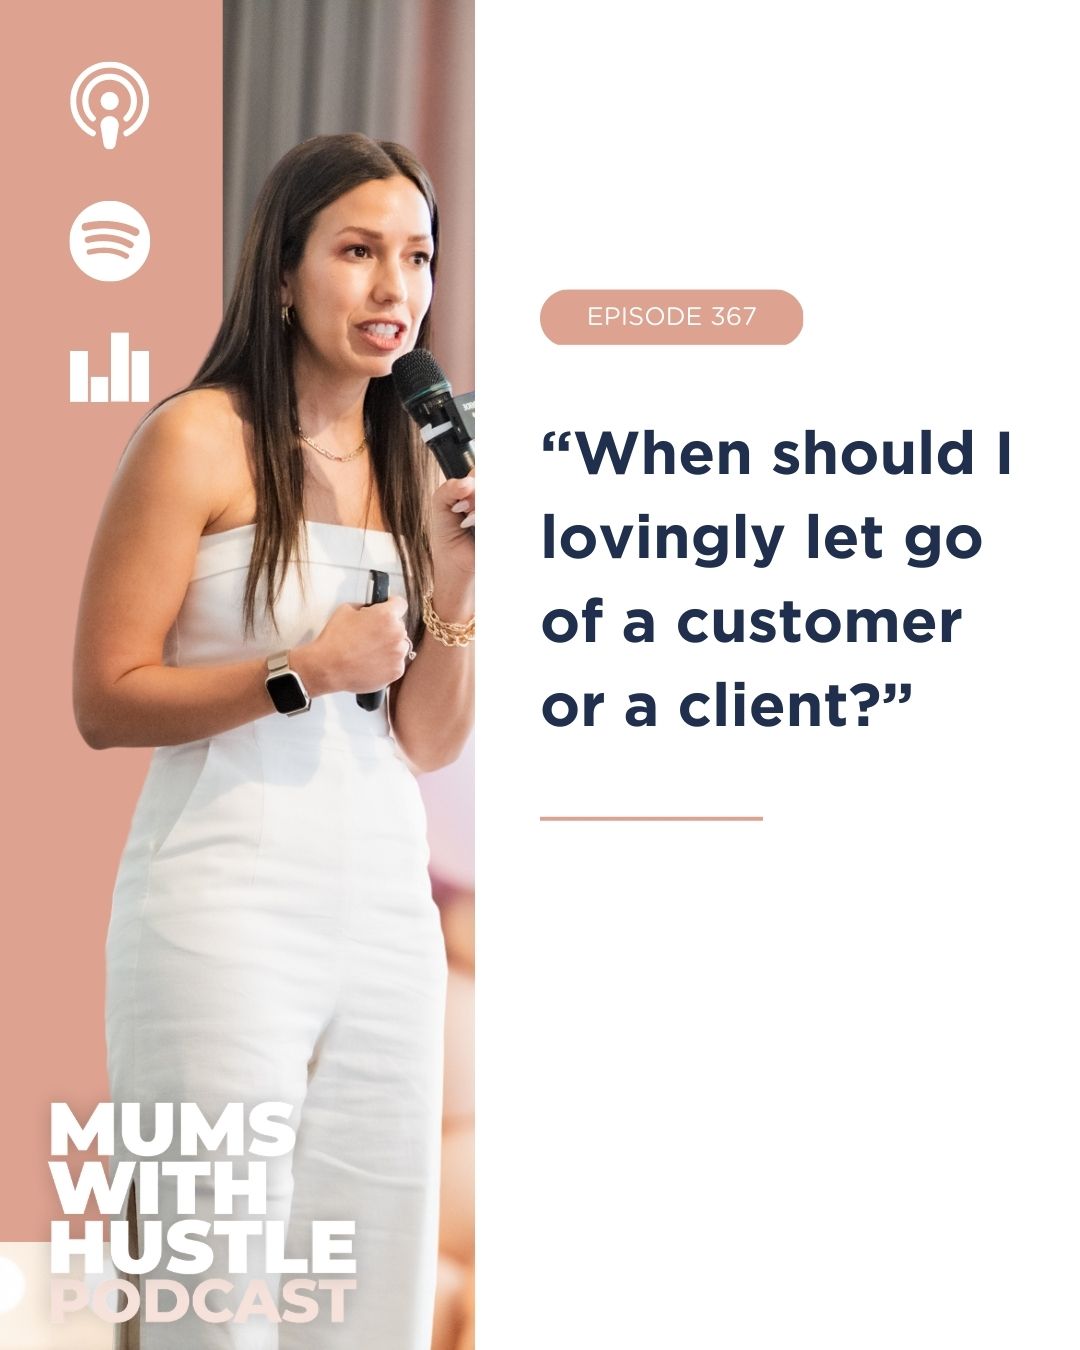 MWH 367 : “When should I lovingly let go of a customer or a client?”